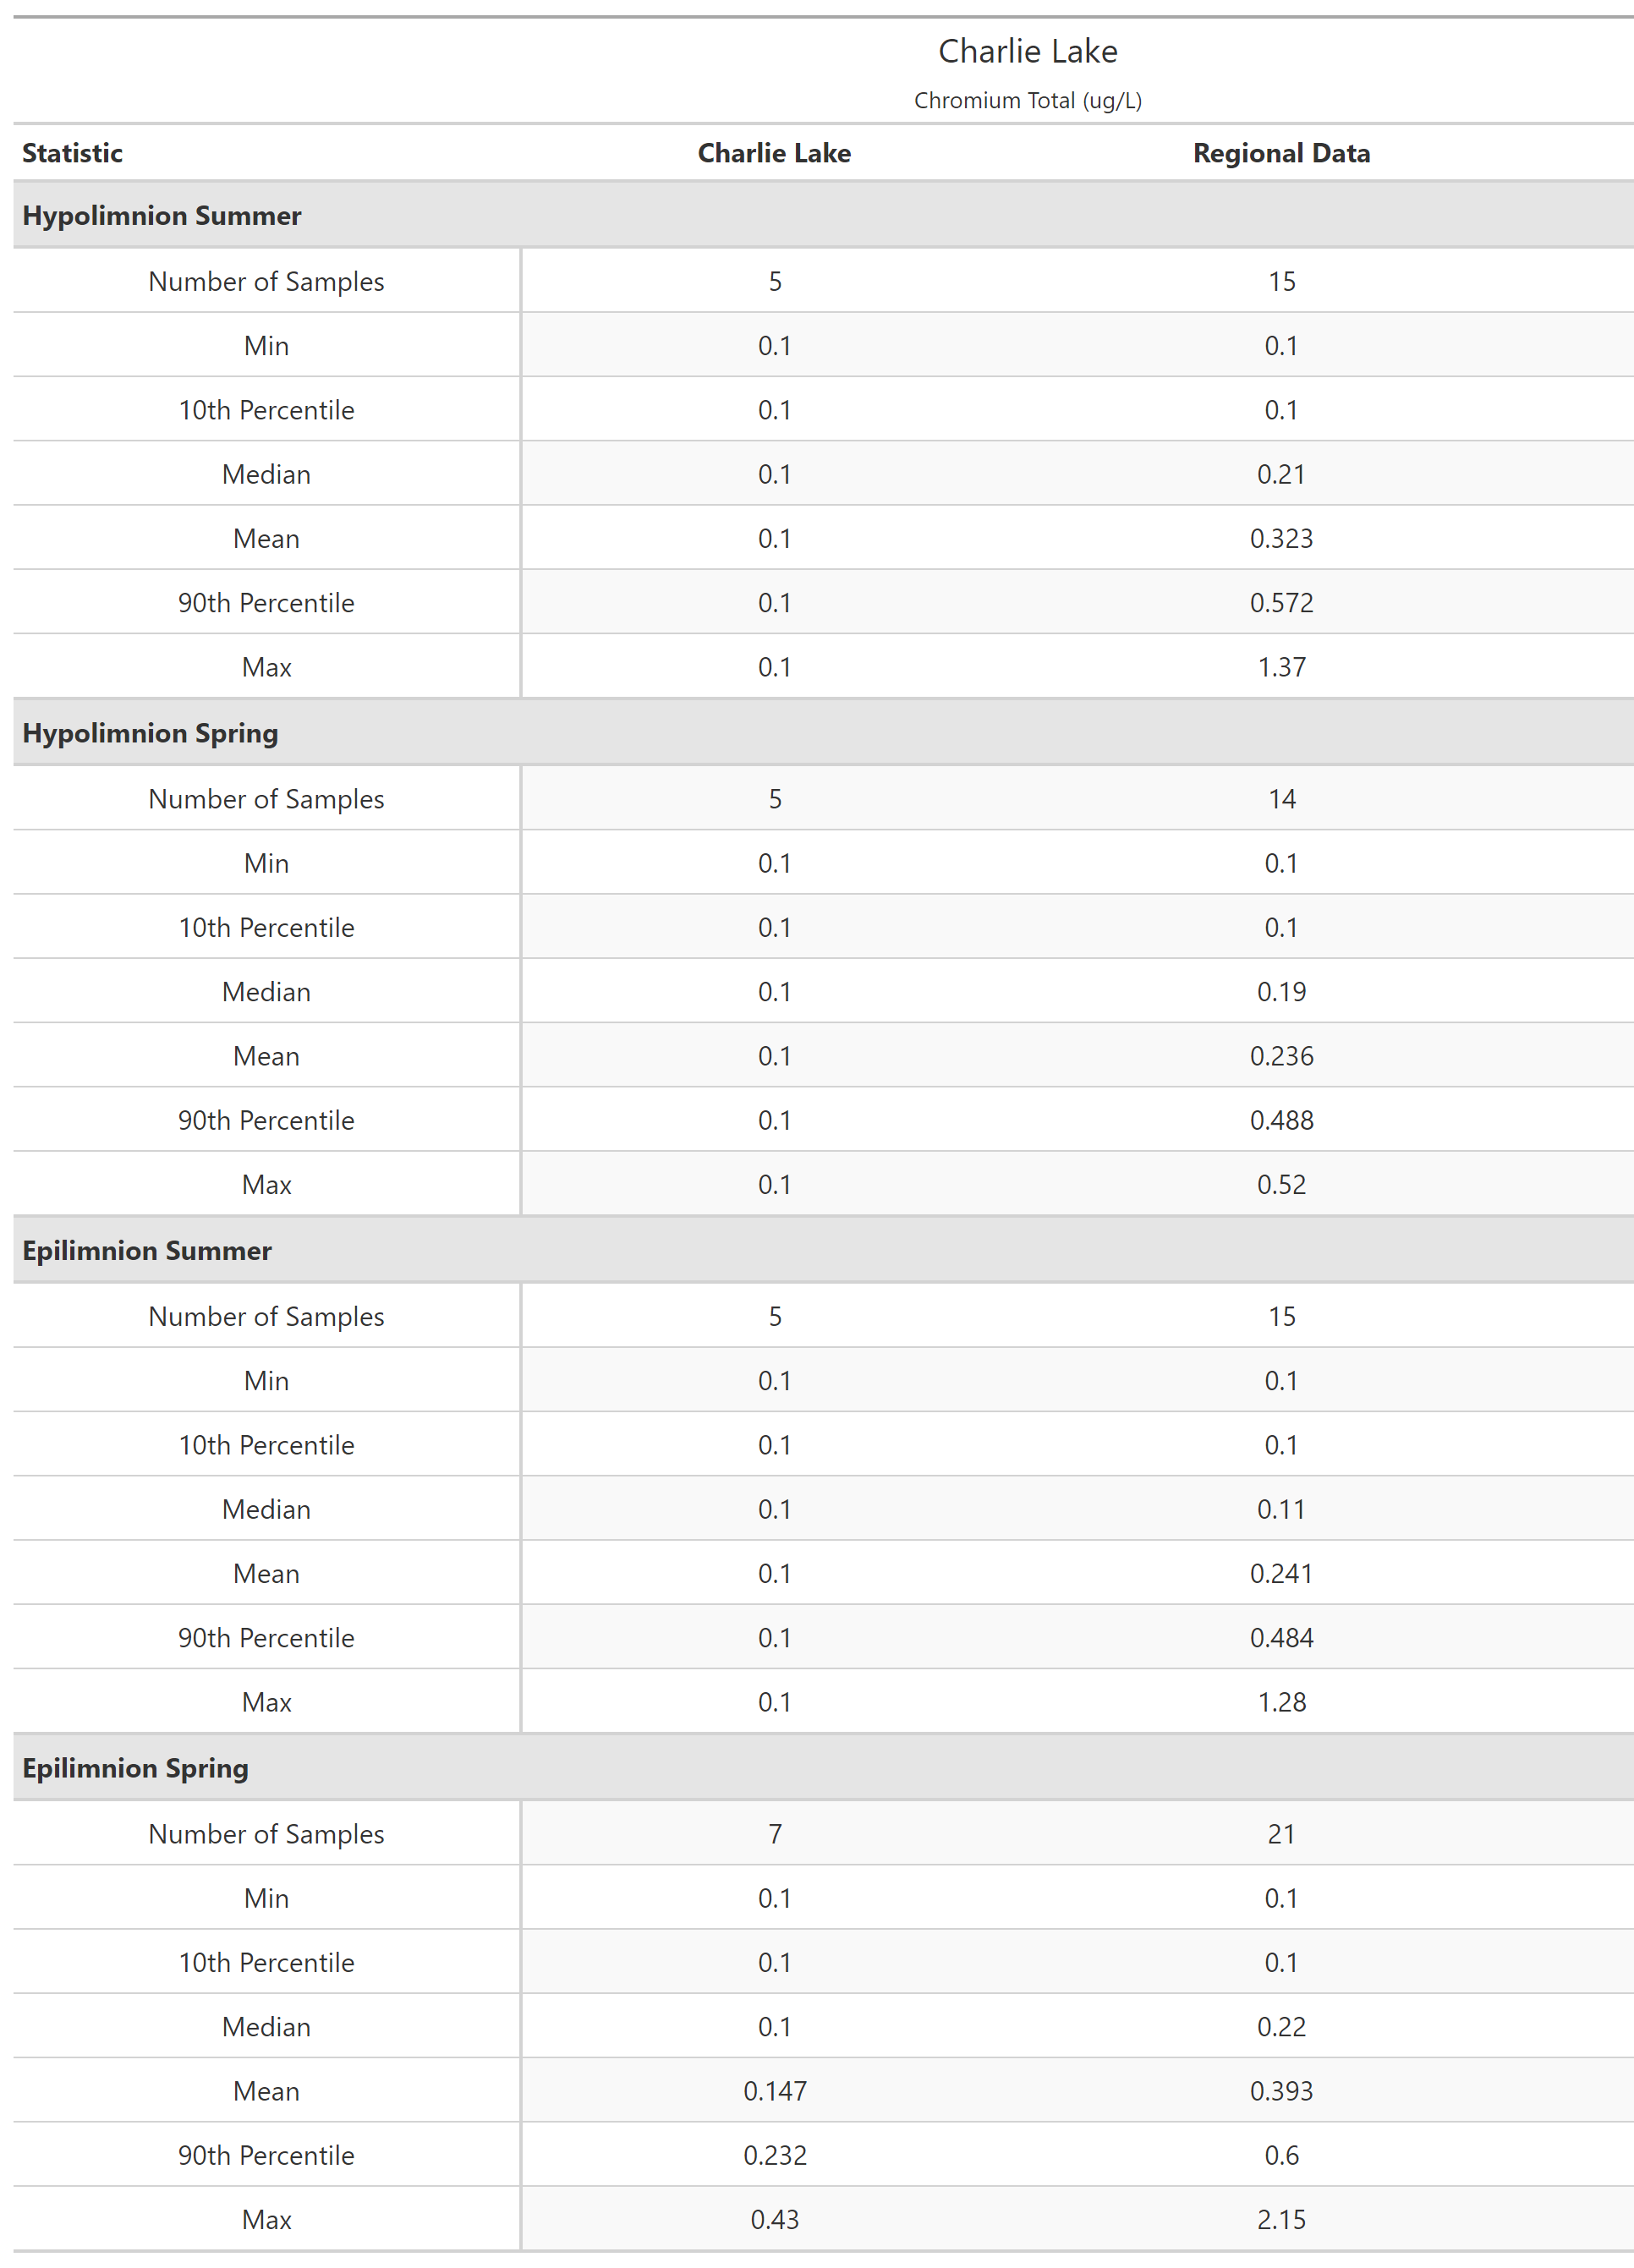 A table of summary statistics for Chromium Total with comparison to regional data